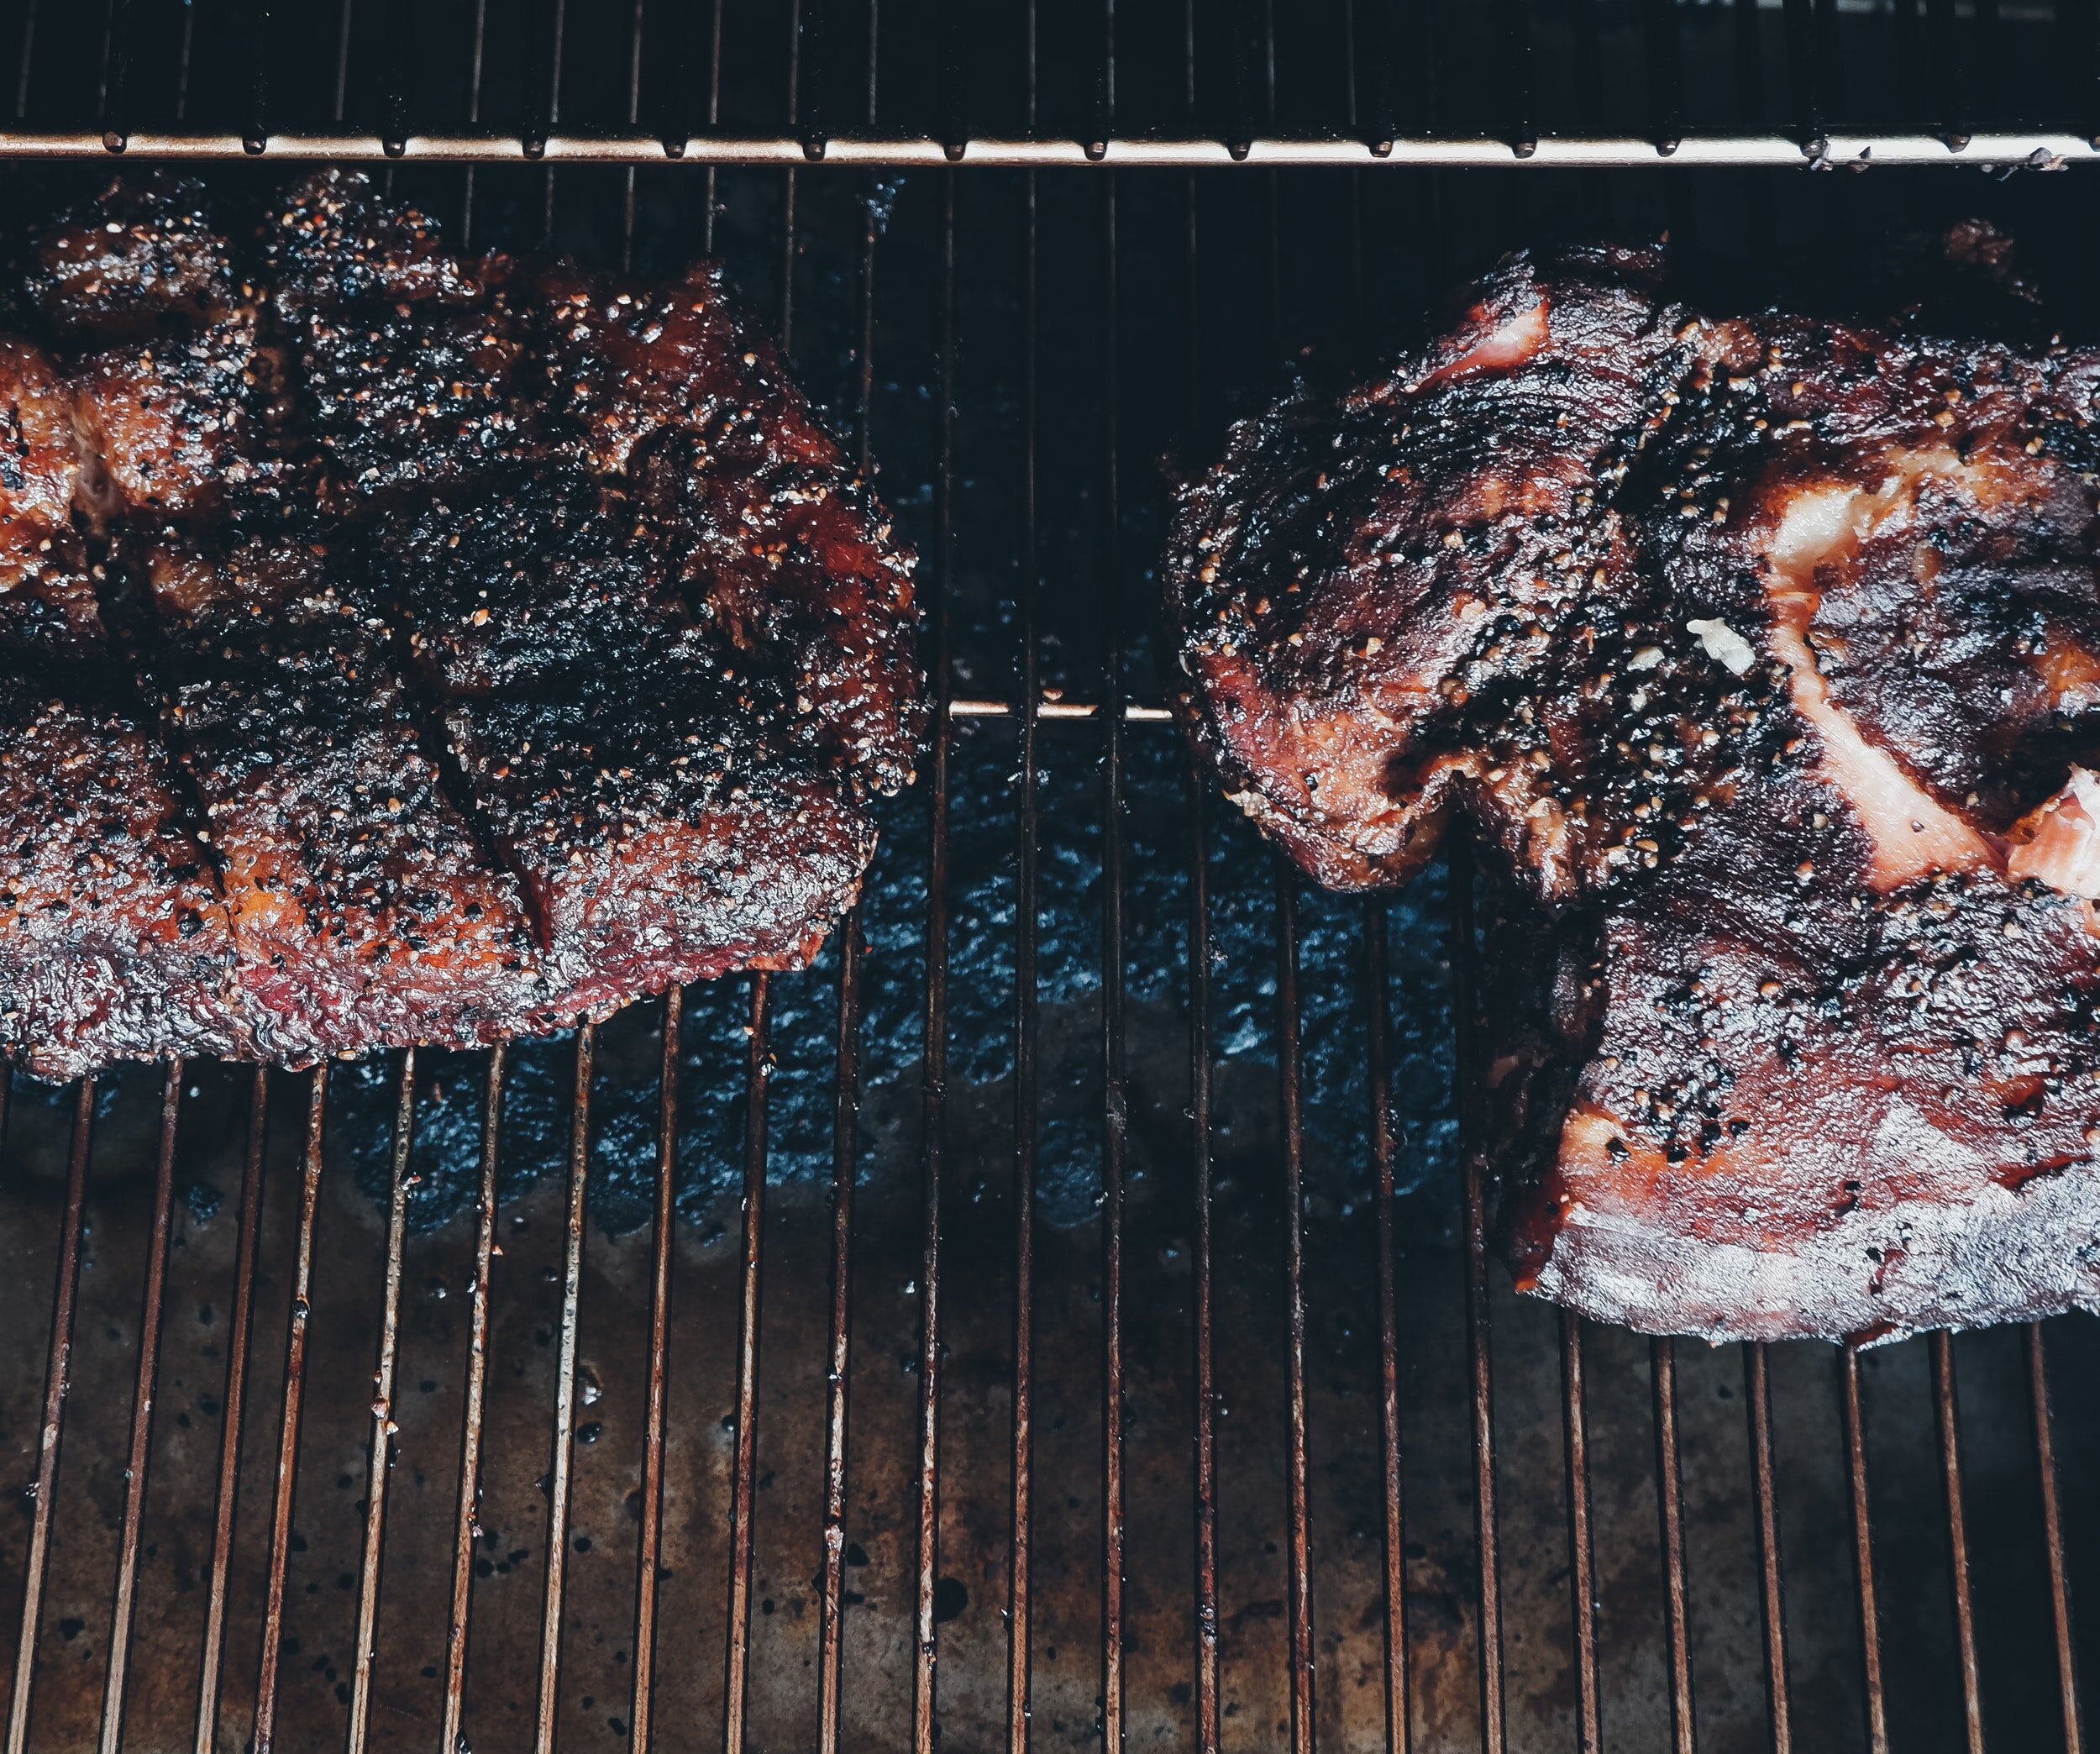 Butcher Paper vs Foil: Which Is Better? - Smoked BBQ Source